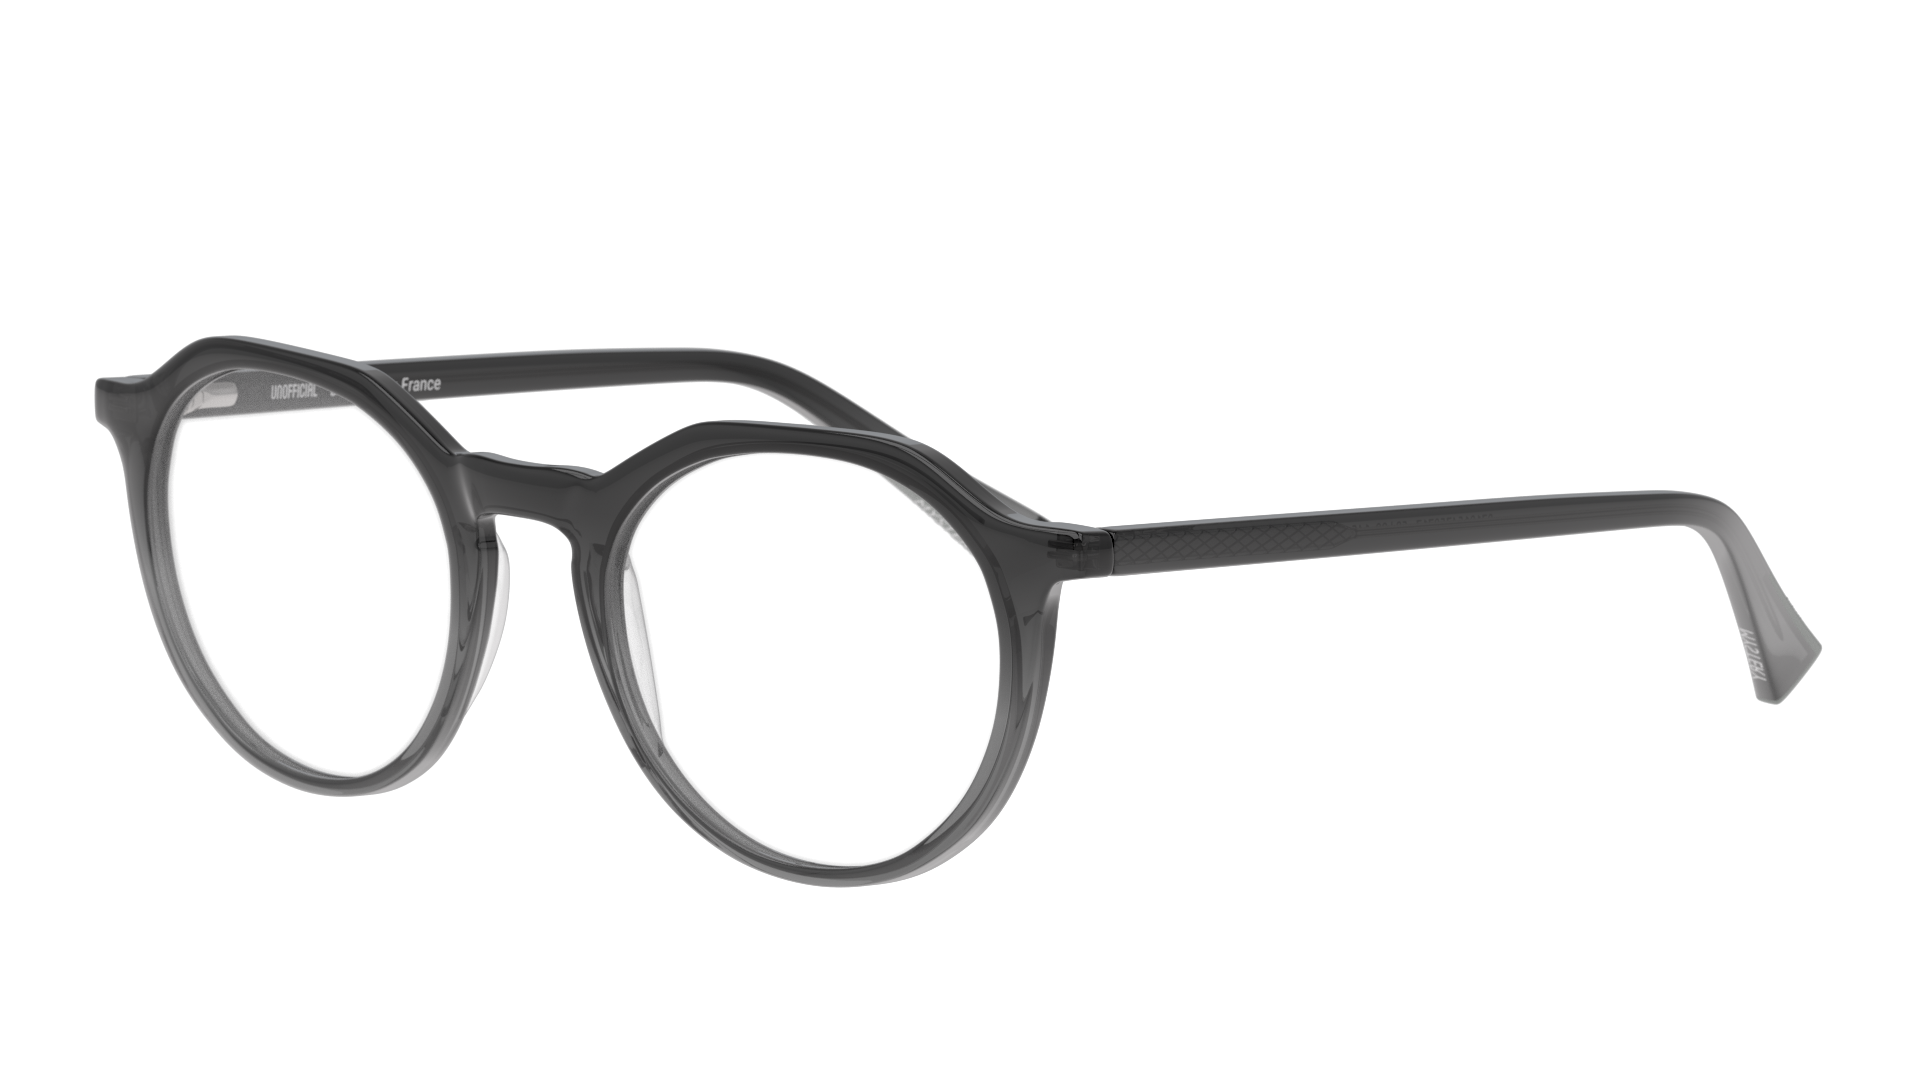 Angle_Left01 Unofficial UNOM0123 (GT00) Glasses Transparent / Grey